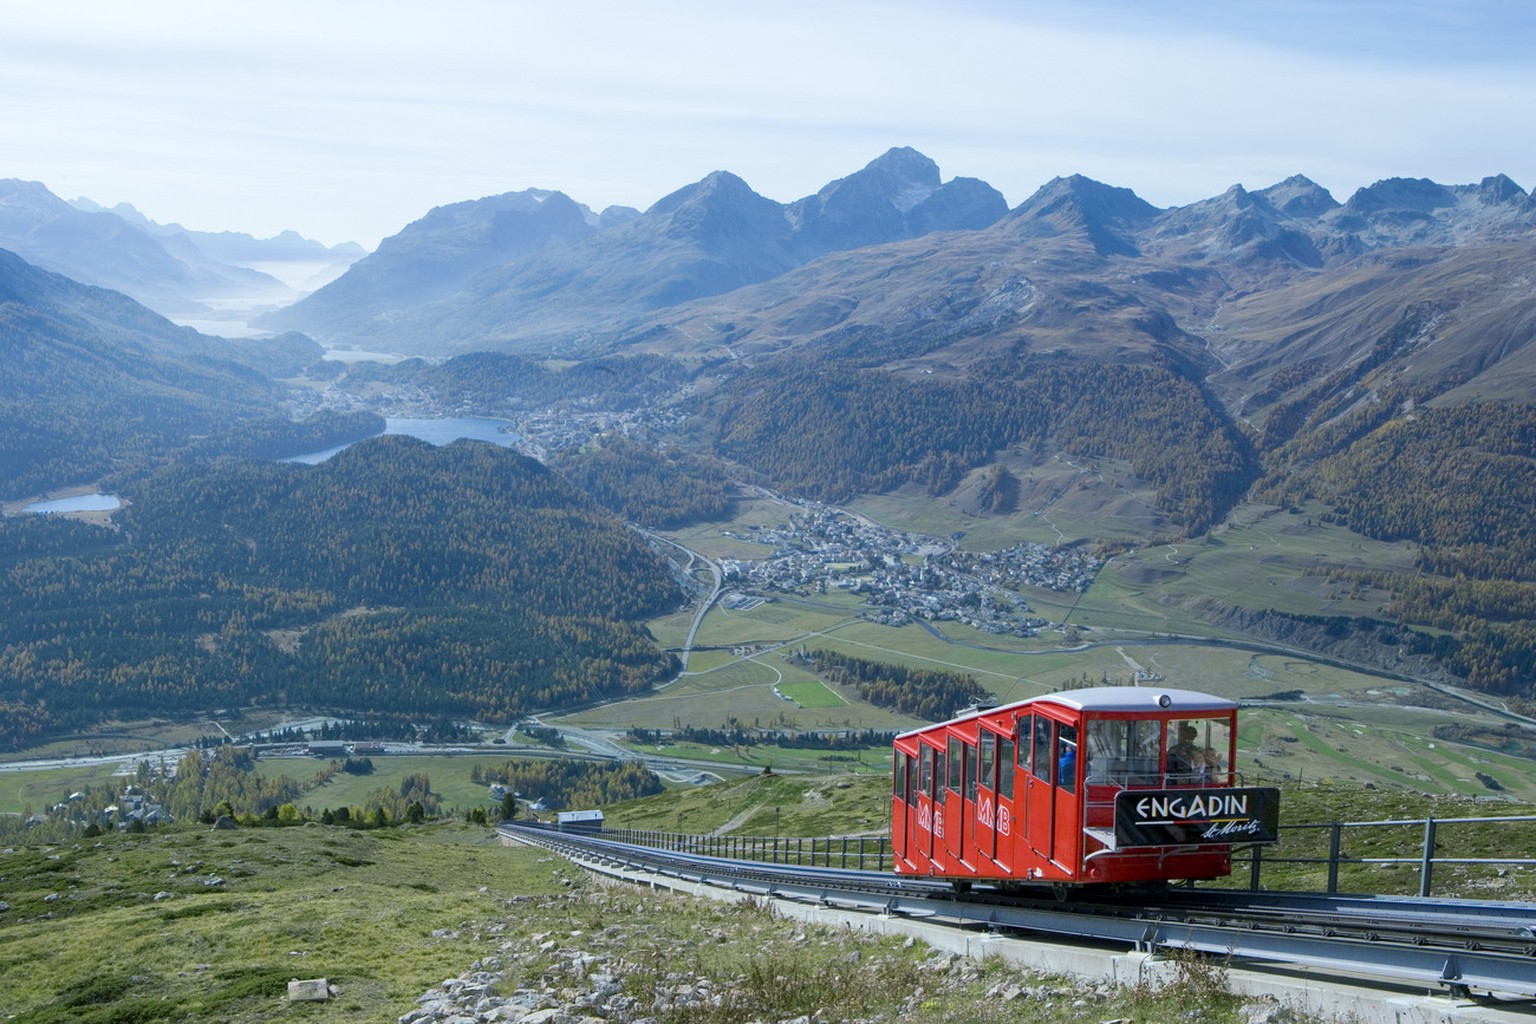 The Muoattas Muragl Railway (MMB) takes tourists from the Punt Muragl onto of the Muottas Muragls in the Engadin valley in the canton of Grisons, Switzerland, pictured on October 18, 2006. Celerina an ...